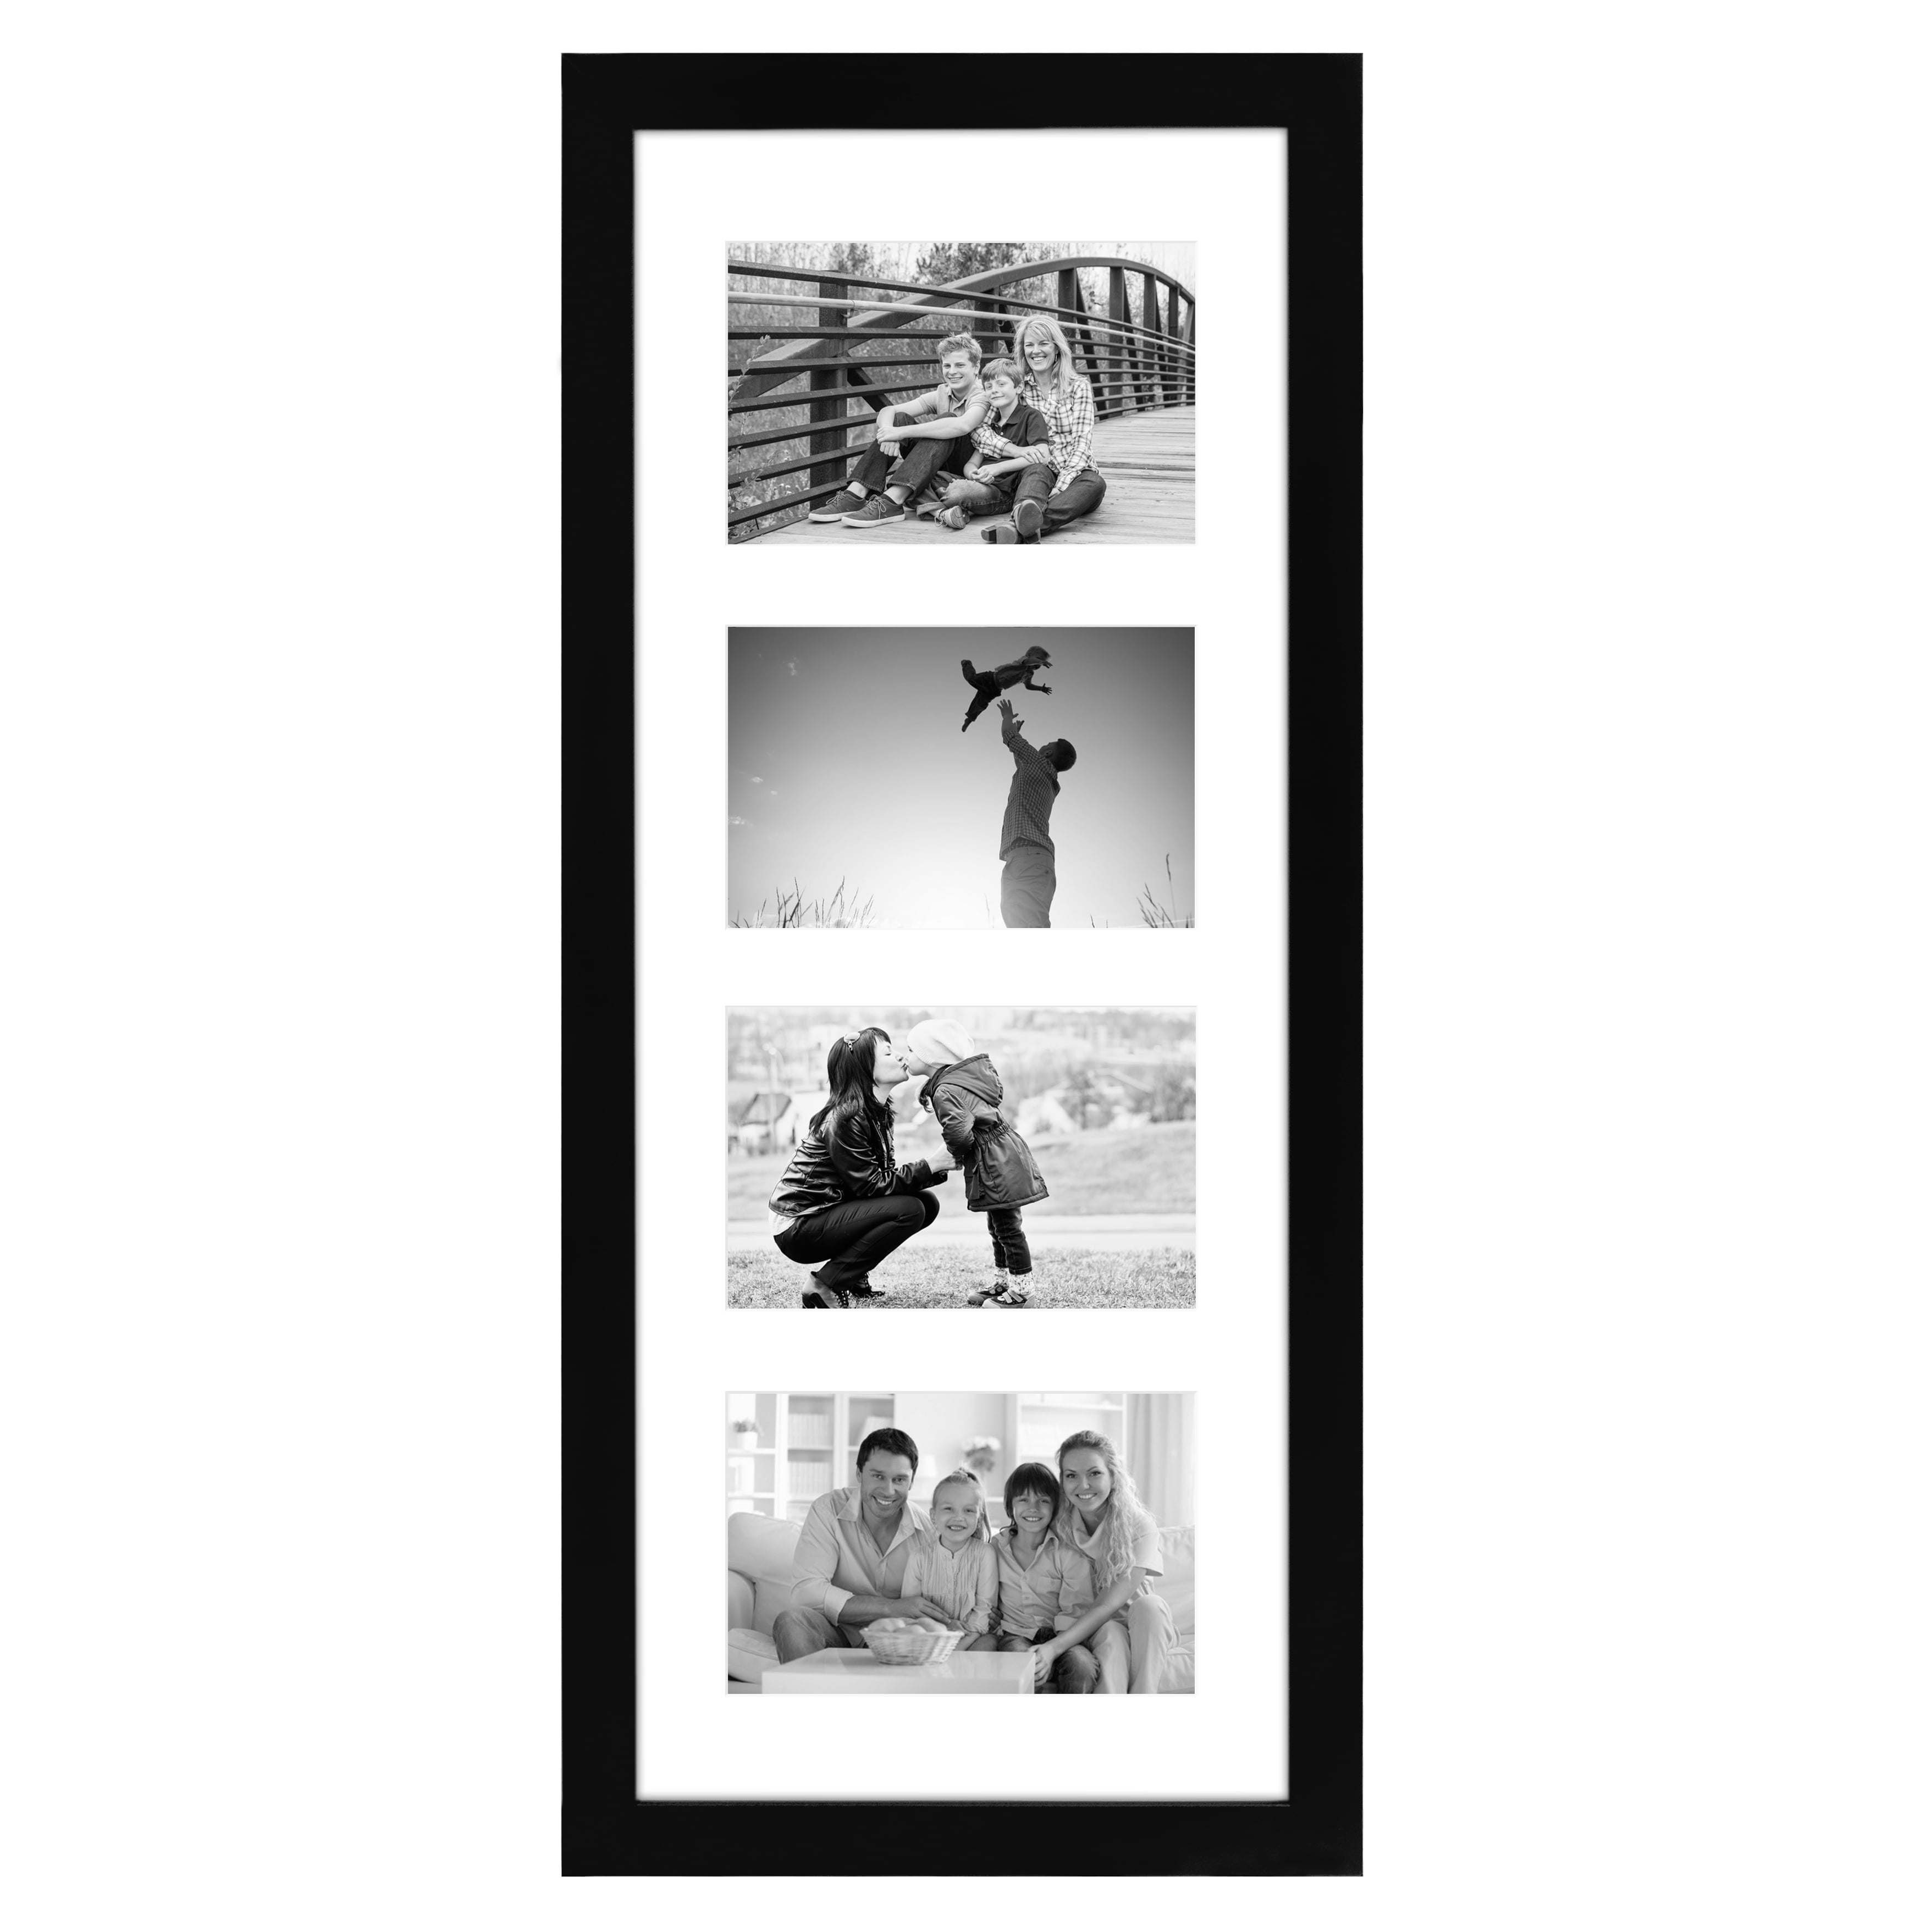 Sold As a Set of 4 Only 4-pack 2x3 Black Linear Wood Photo Frames 